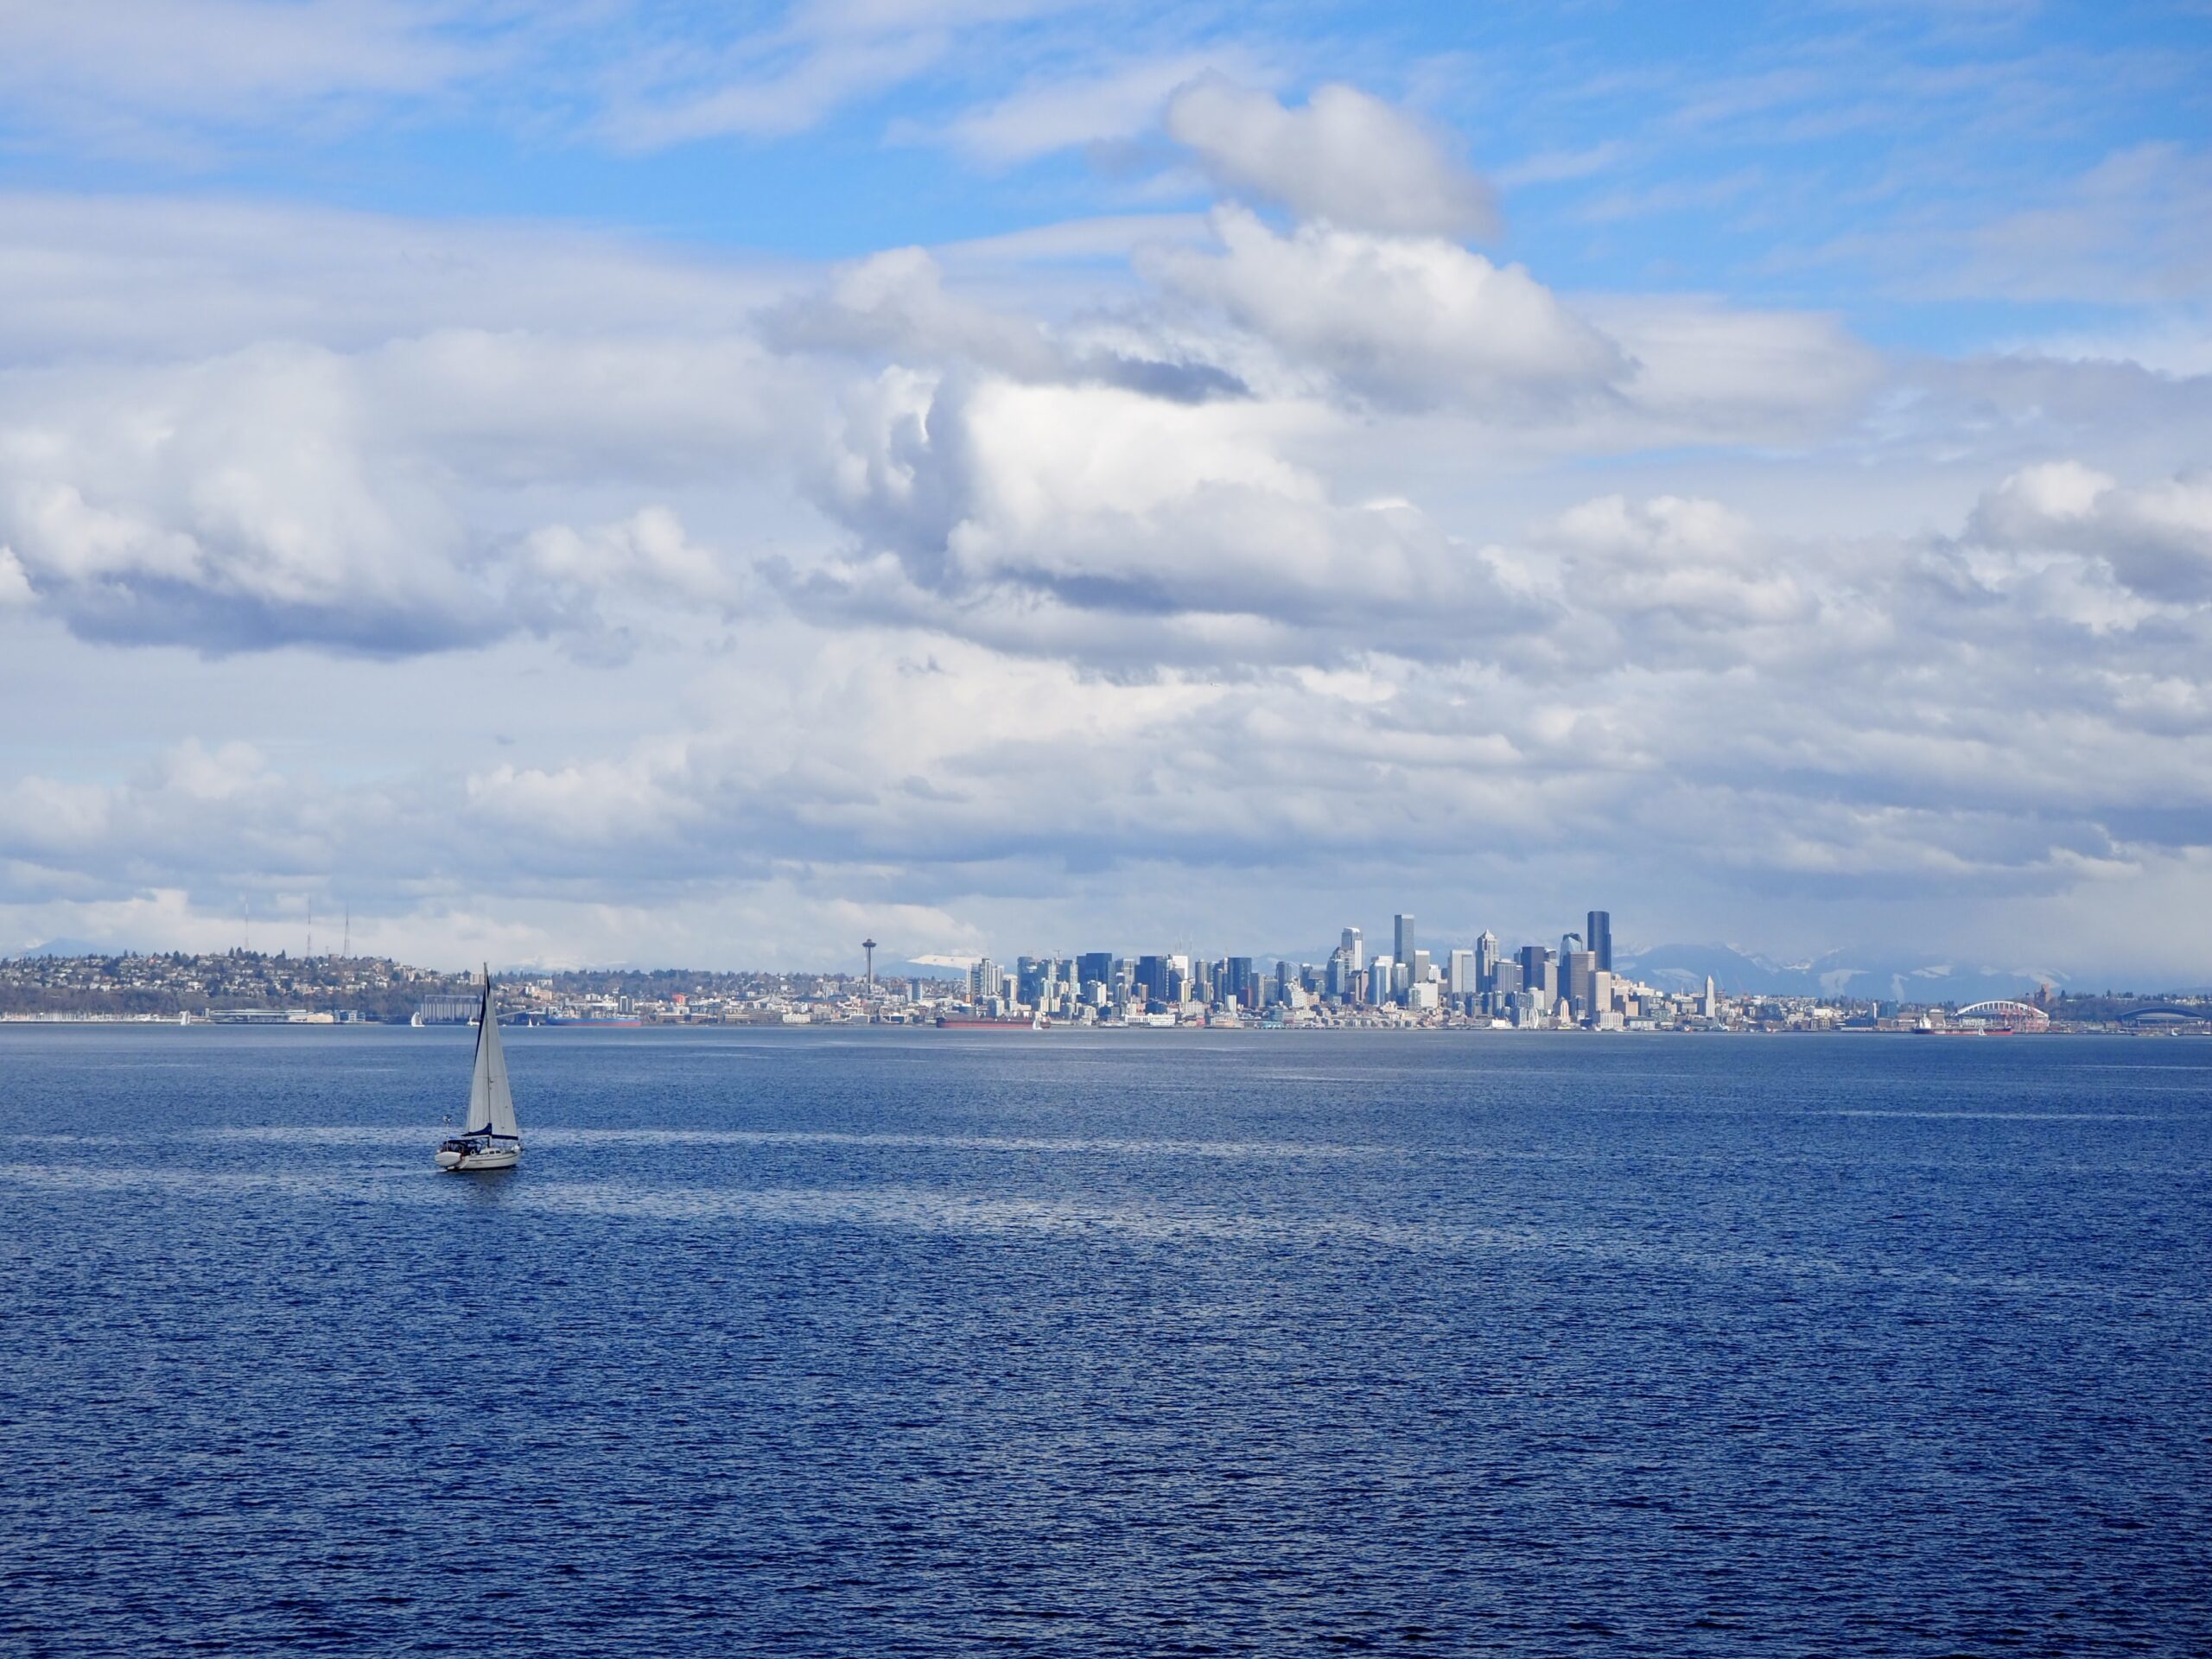 Seattle skyline from the Puget Sound - 3 day trip to Seattle, Washington feature photo